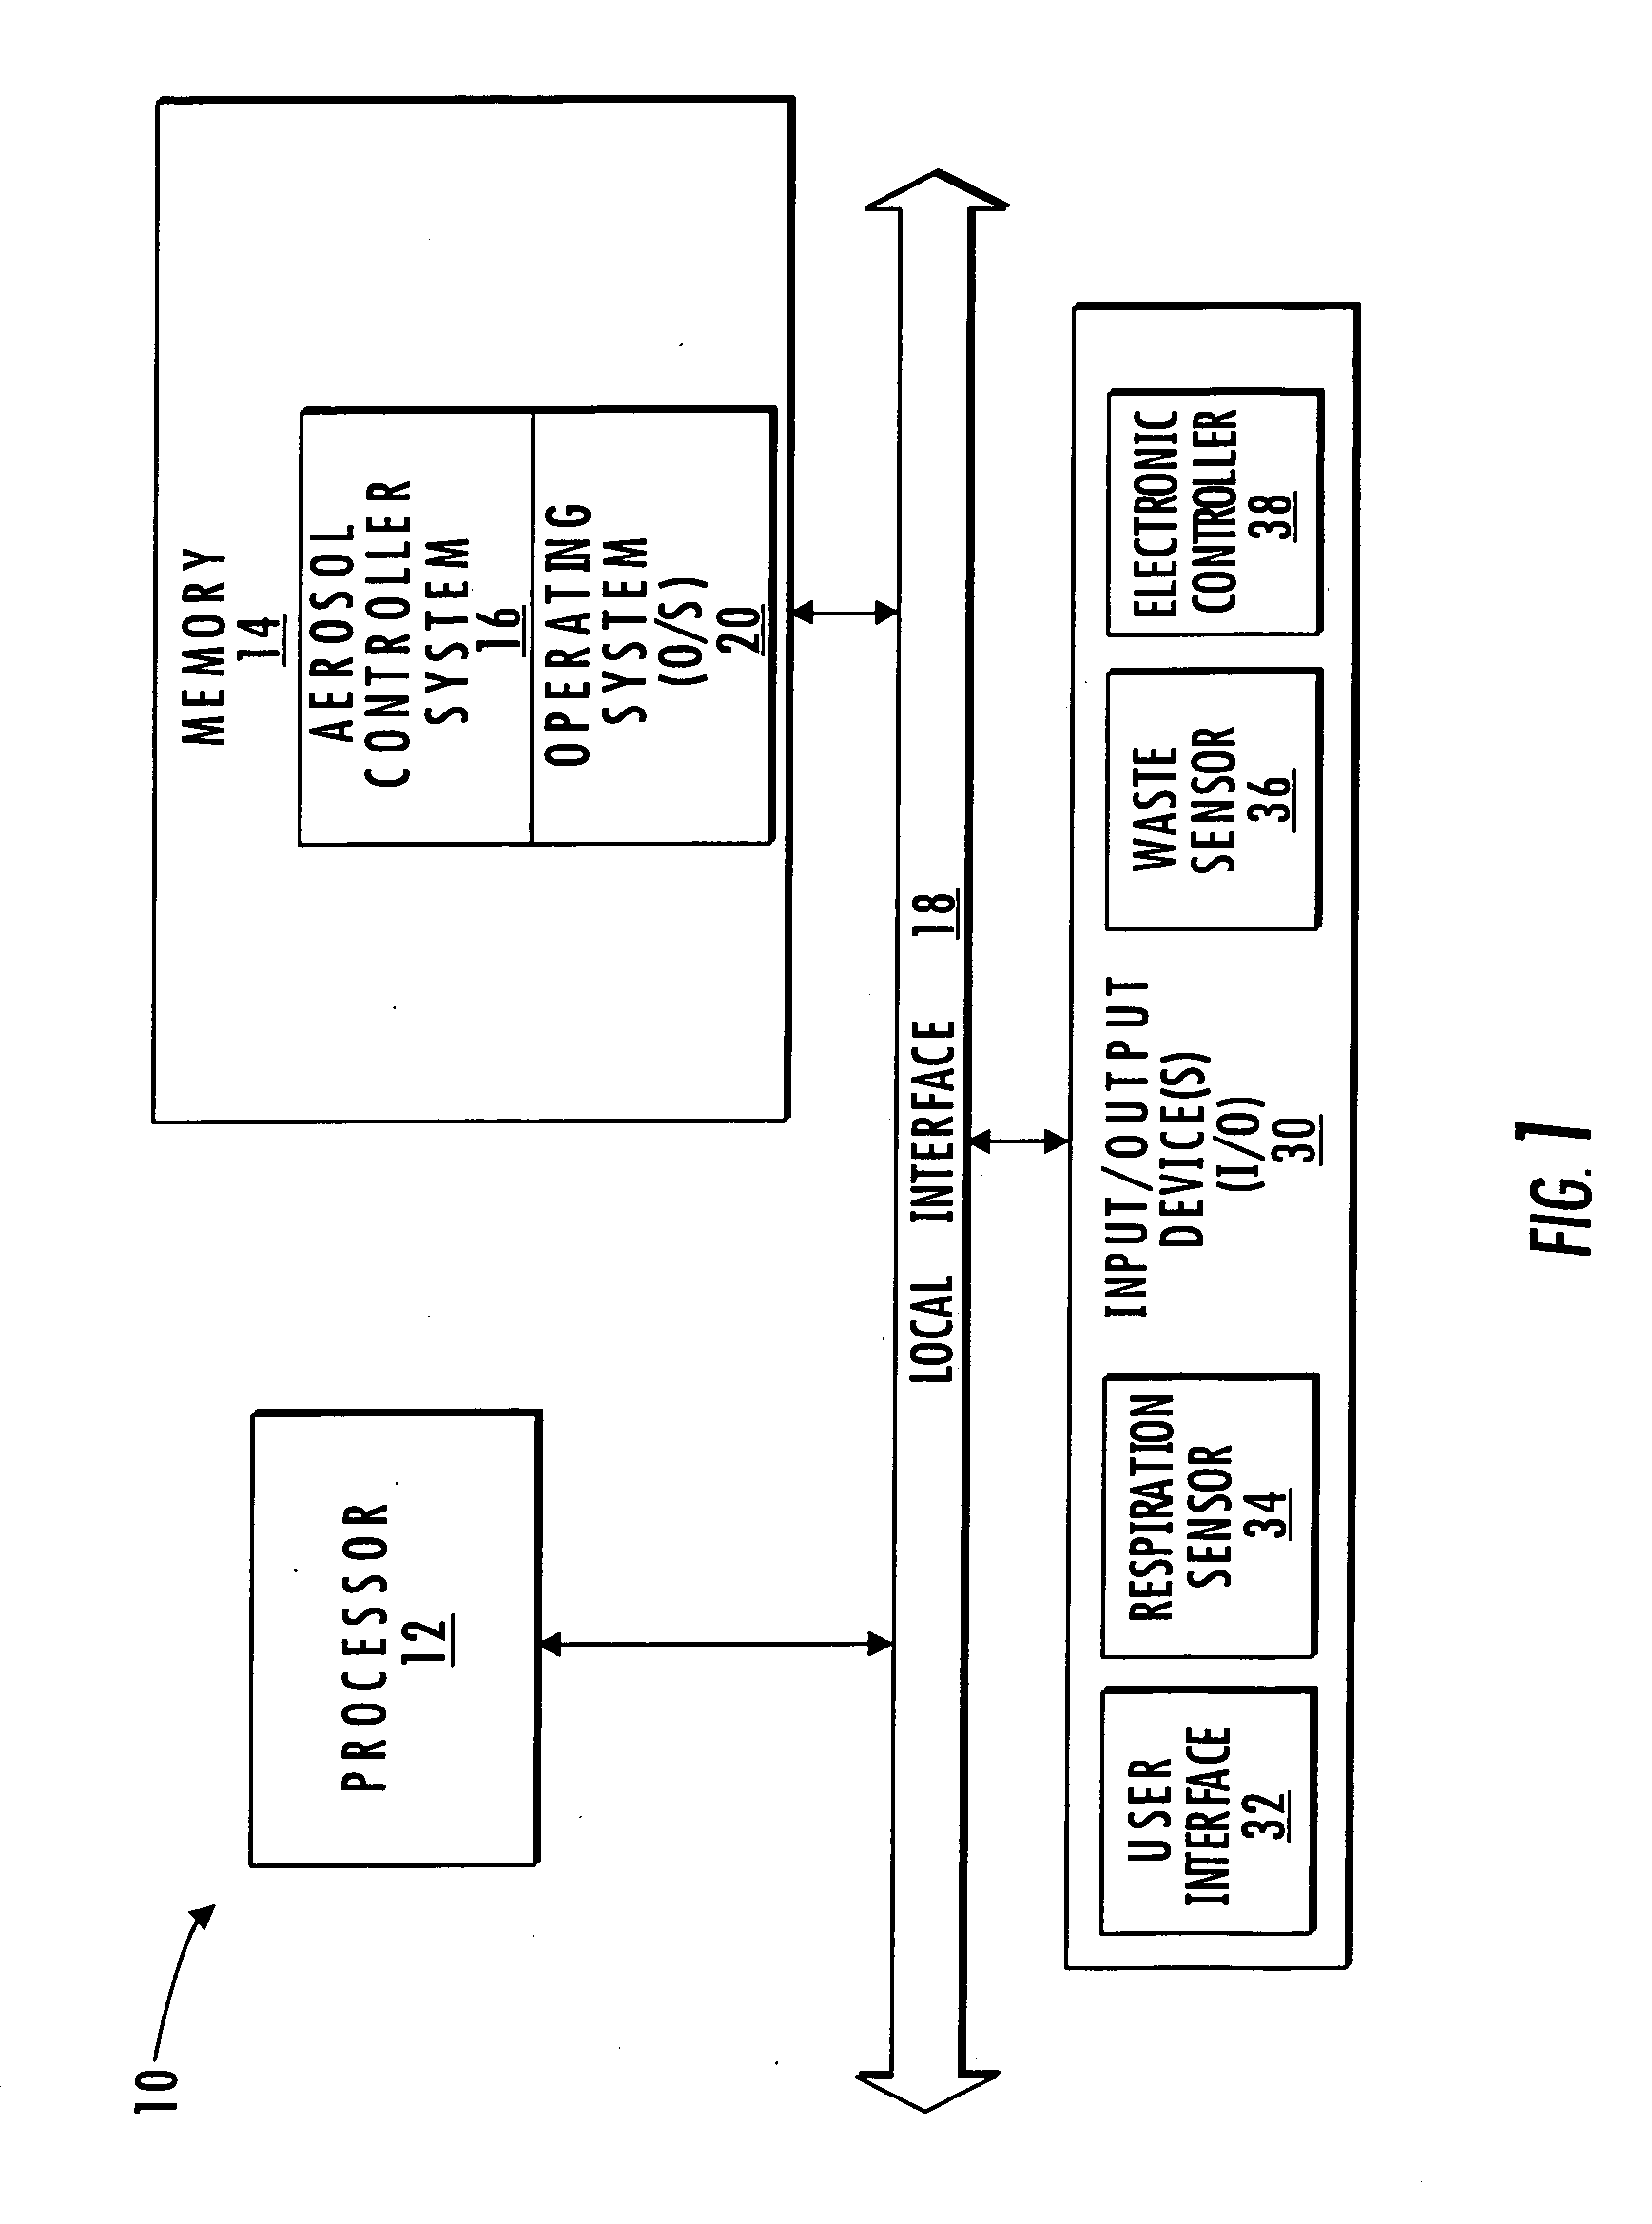 System and method for optimized delivery of an aerosol to the respiratory tract